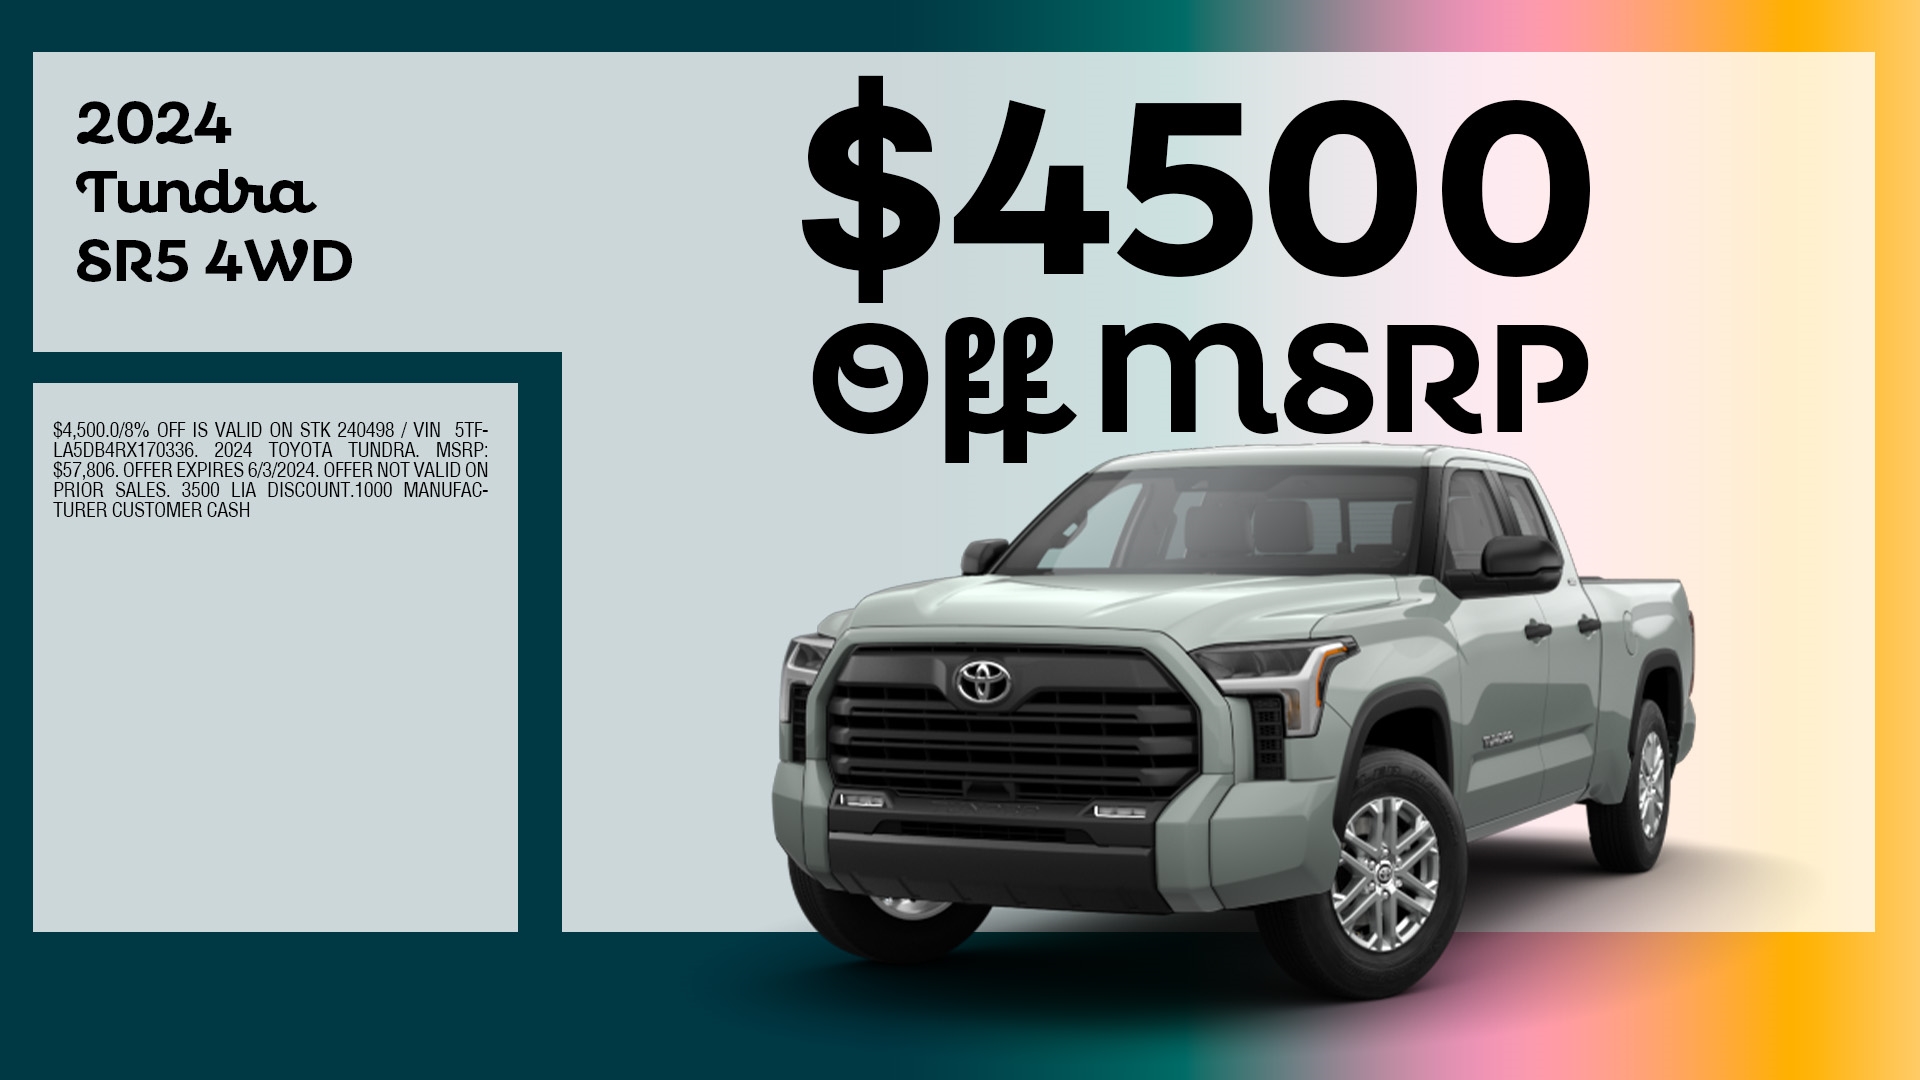 tundra apr purchase special